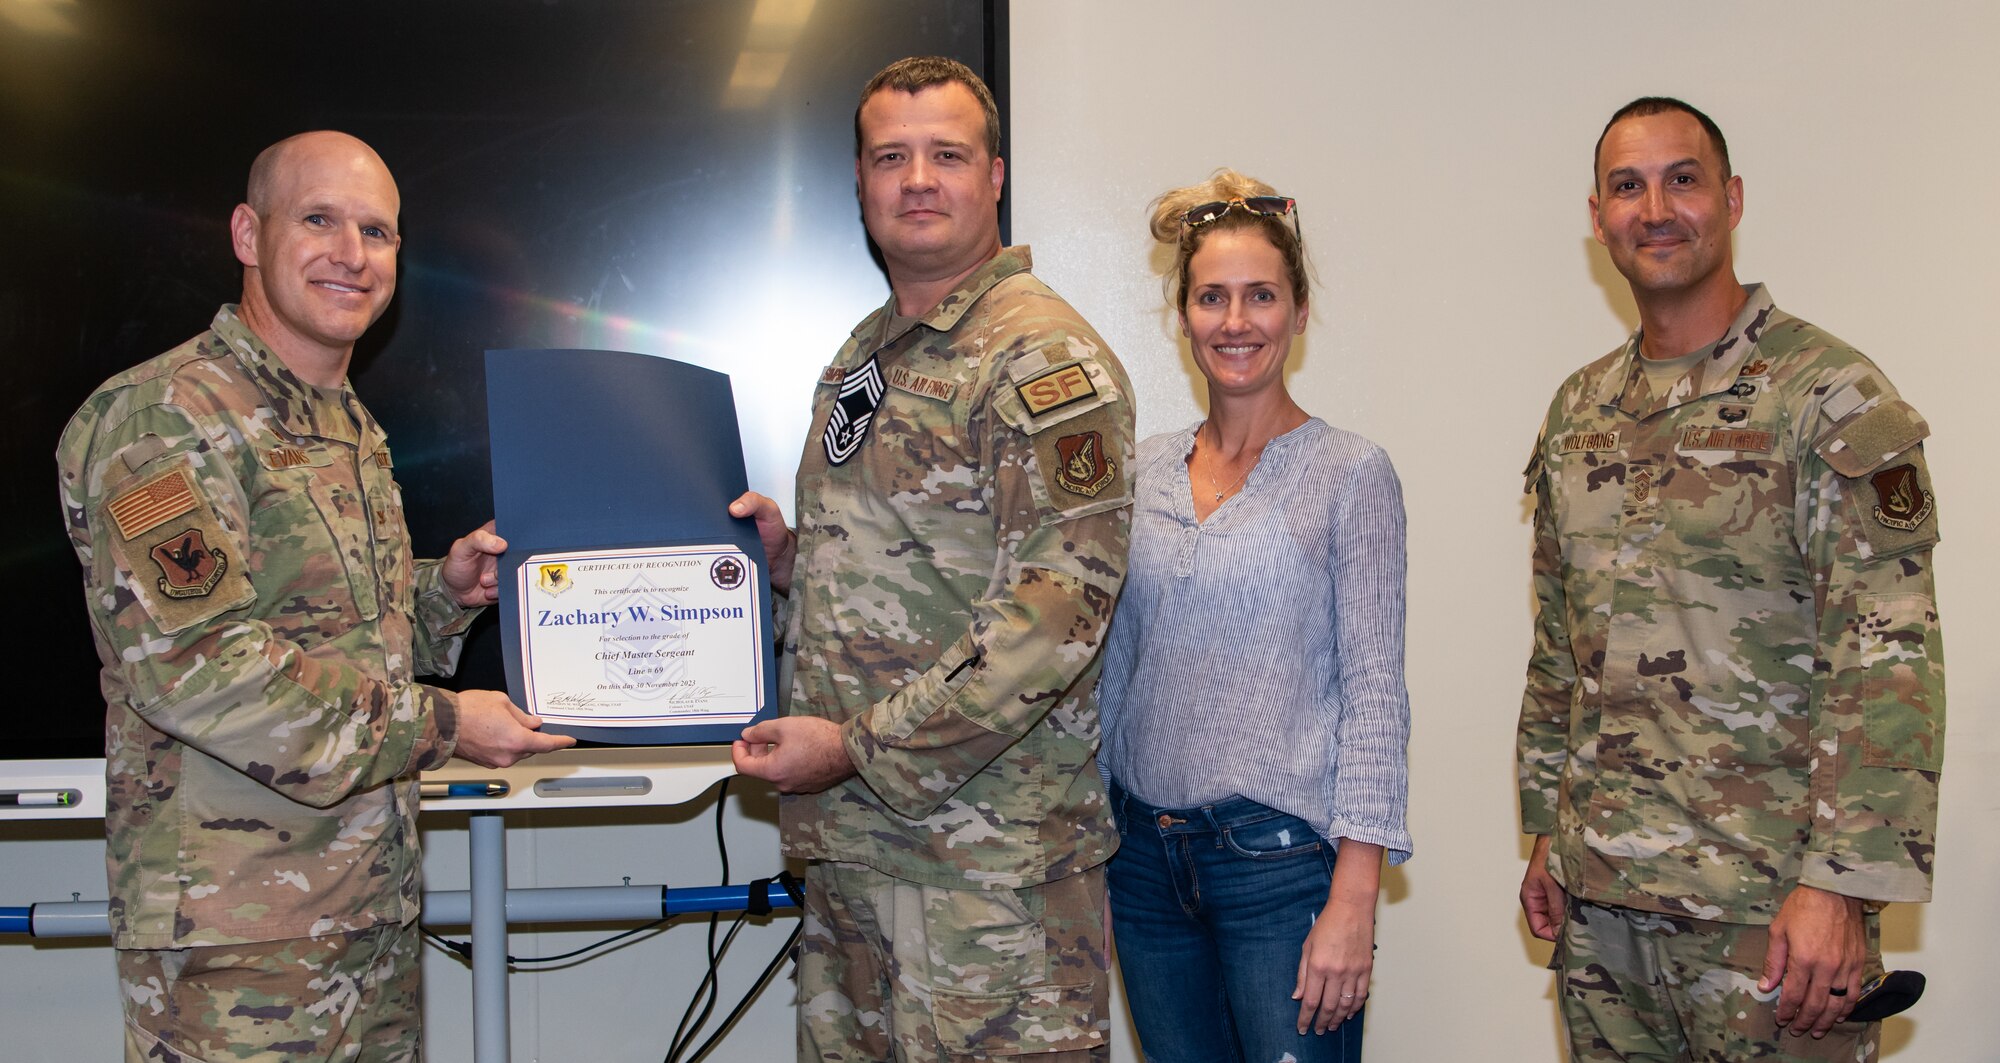 Three U.S. Air Force service members, A Chief Master Sergeant select and his spouse, pose with a certificate.